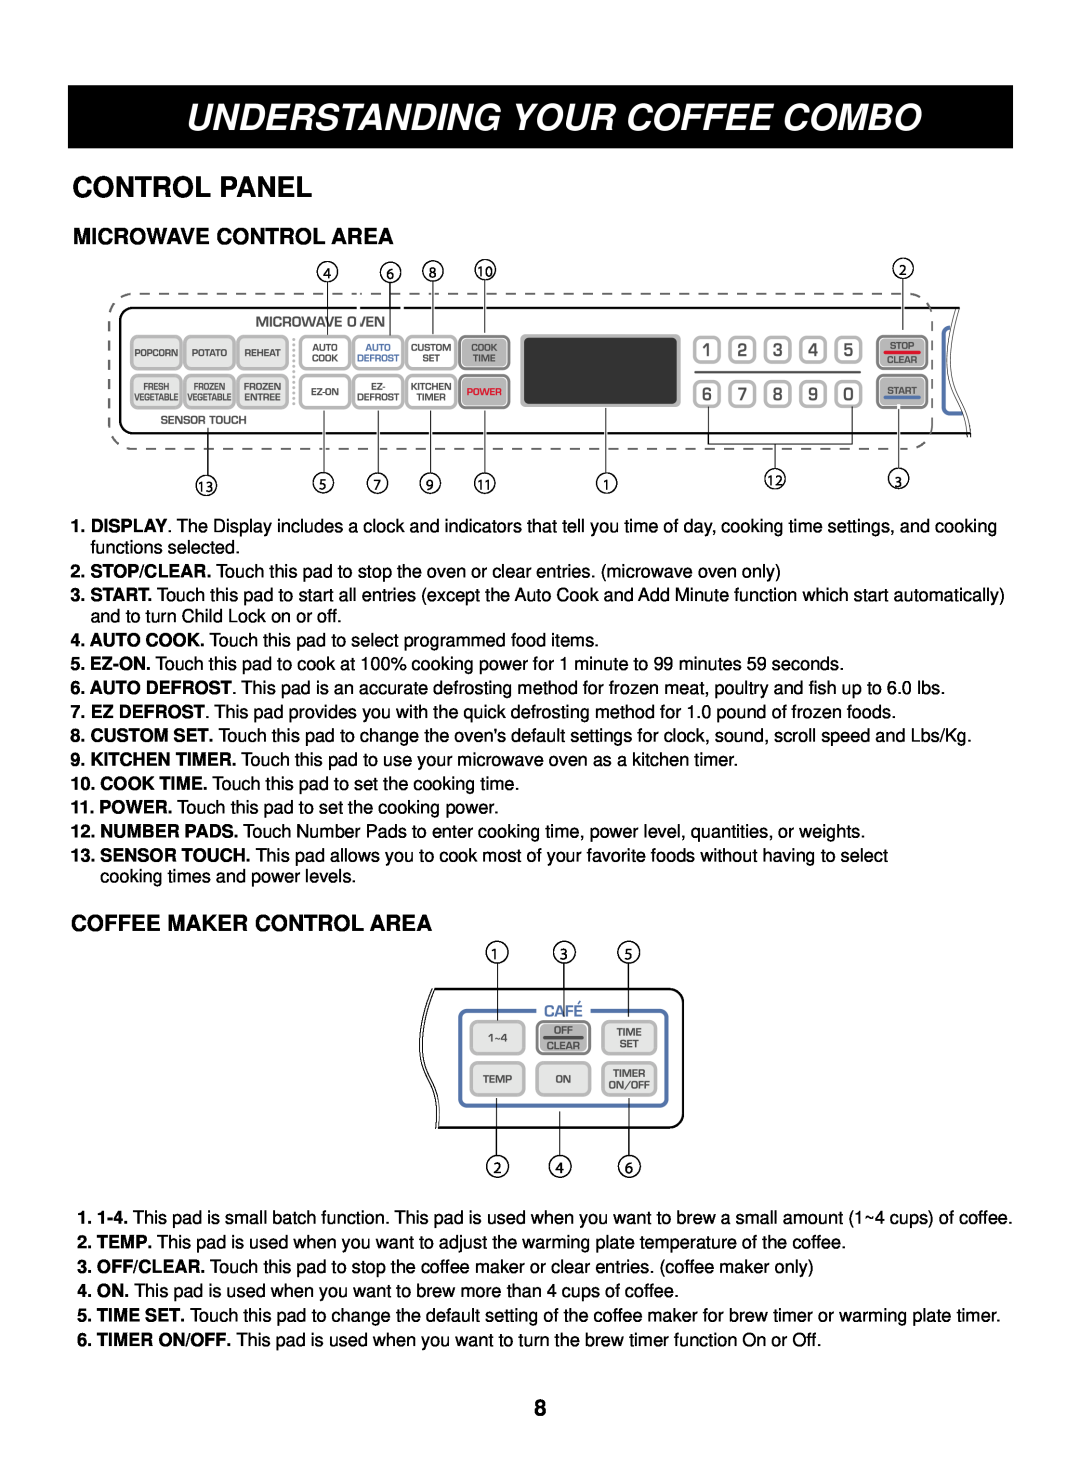 LG Electronics LCRM1240ST, LCRM1240SB manual Control Panel, Understanding Your Coffee Combo, Microwave Control Area 